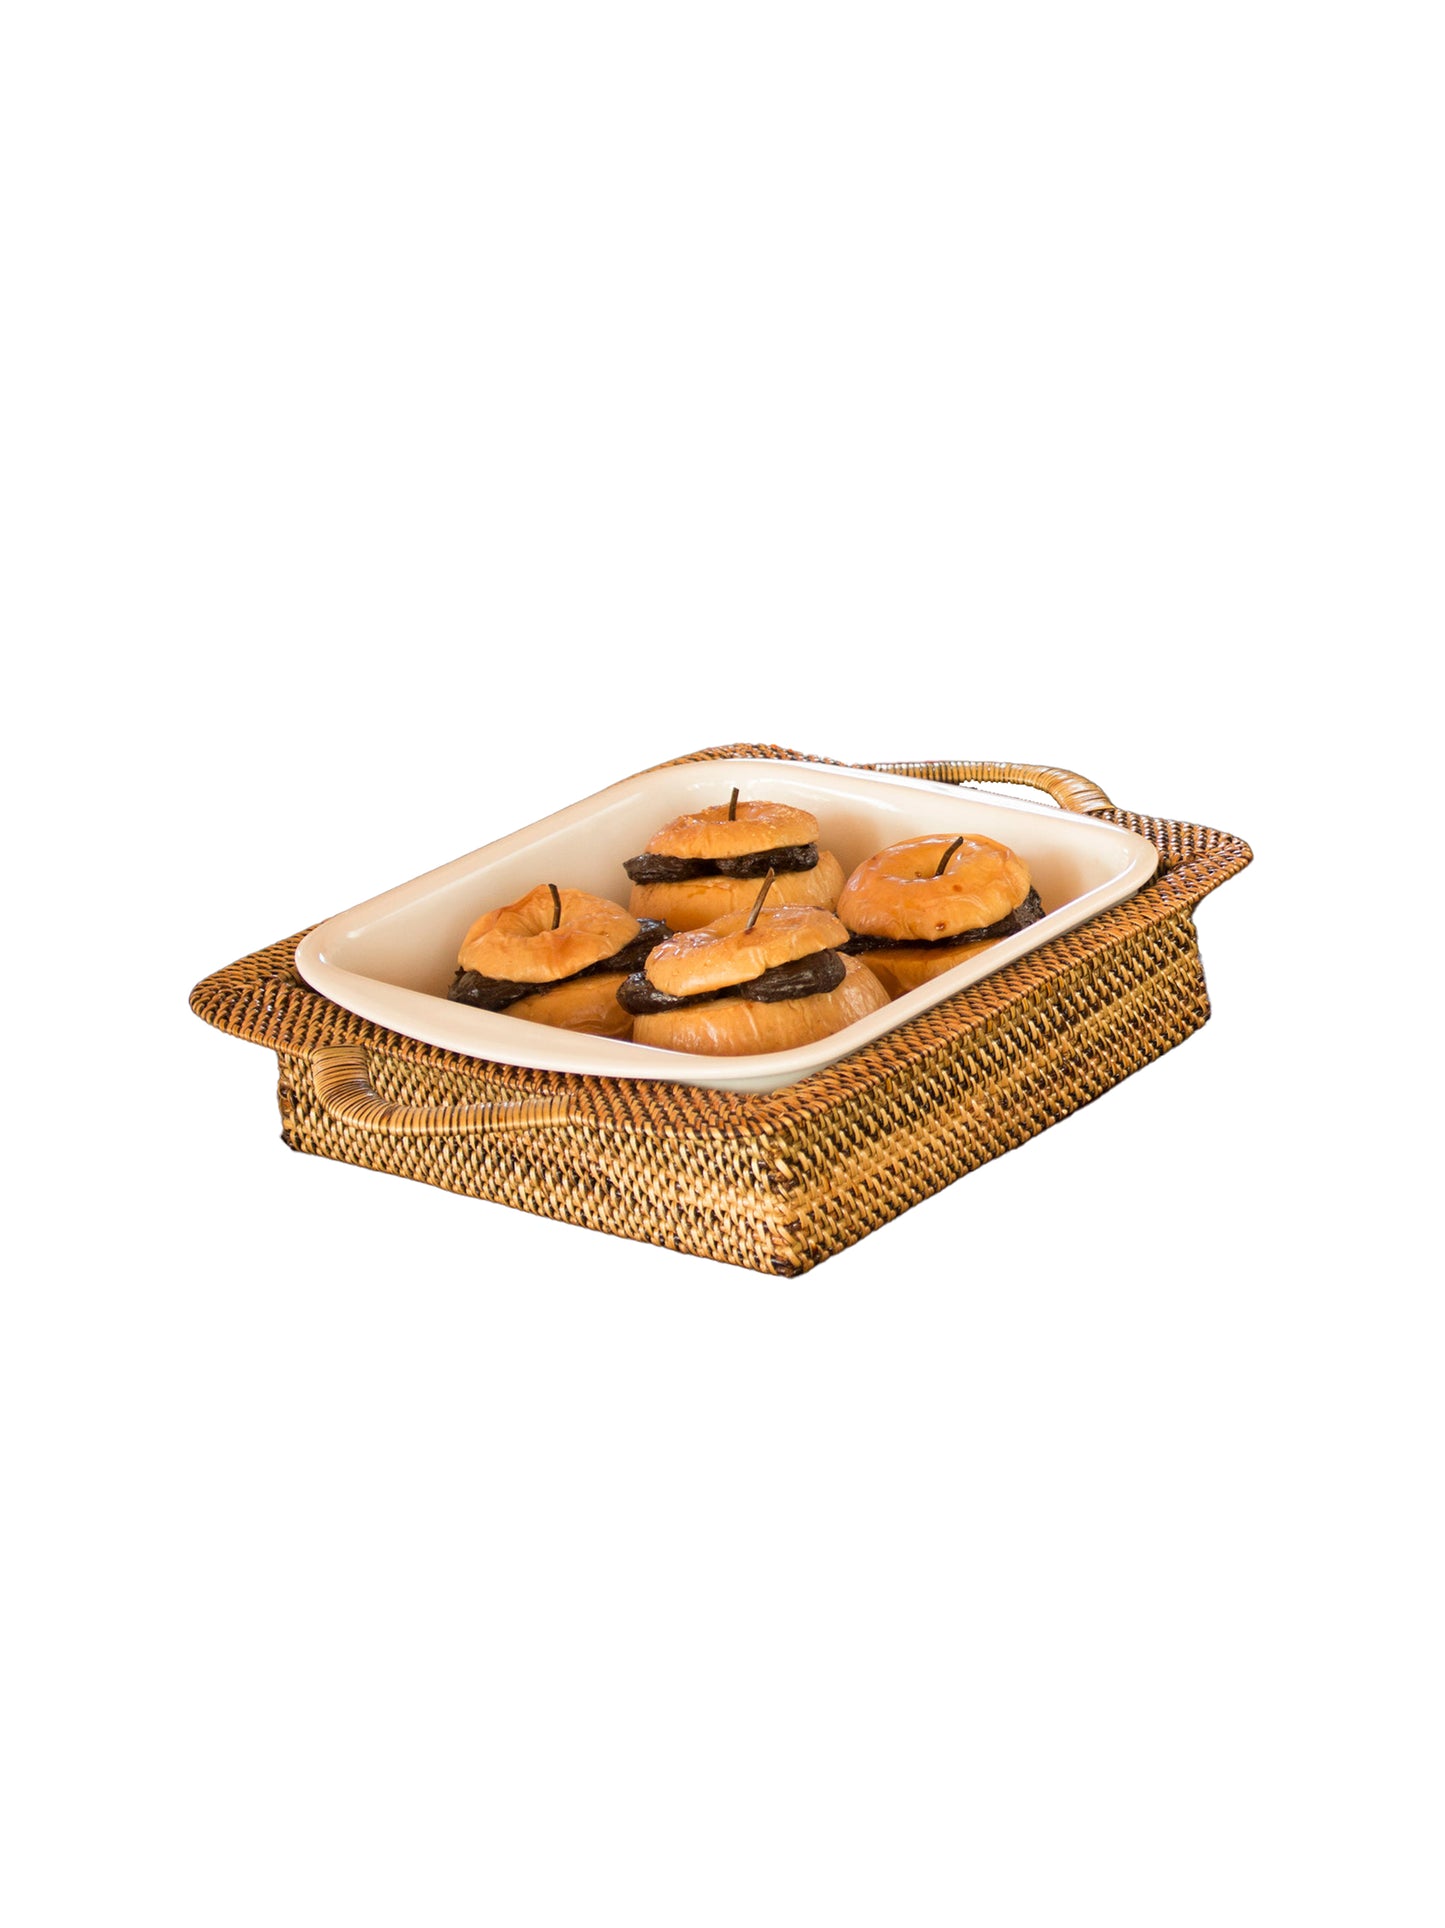 Calaisio Rectangular Basket with Wrapped Handles and 3 Quart Pillivuyt Baker Weston Table